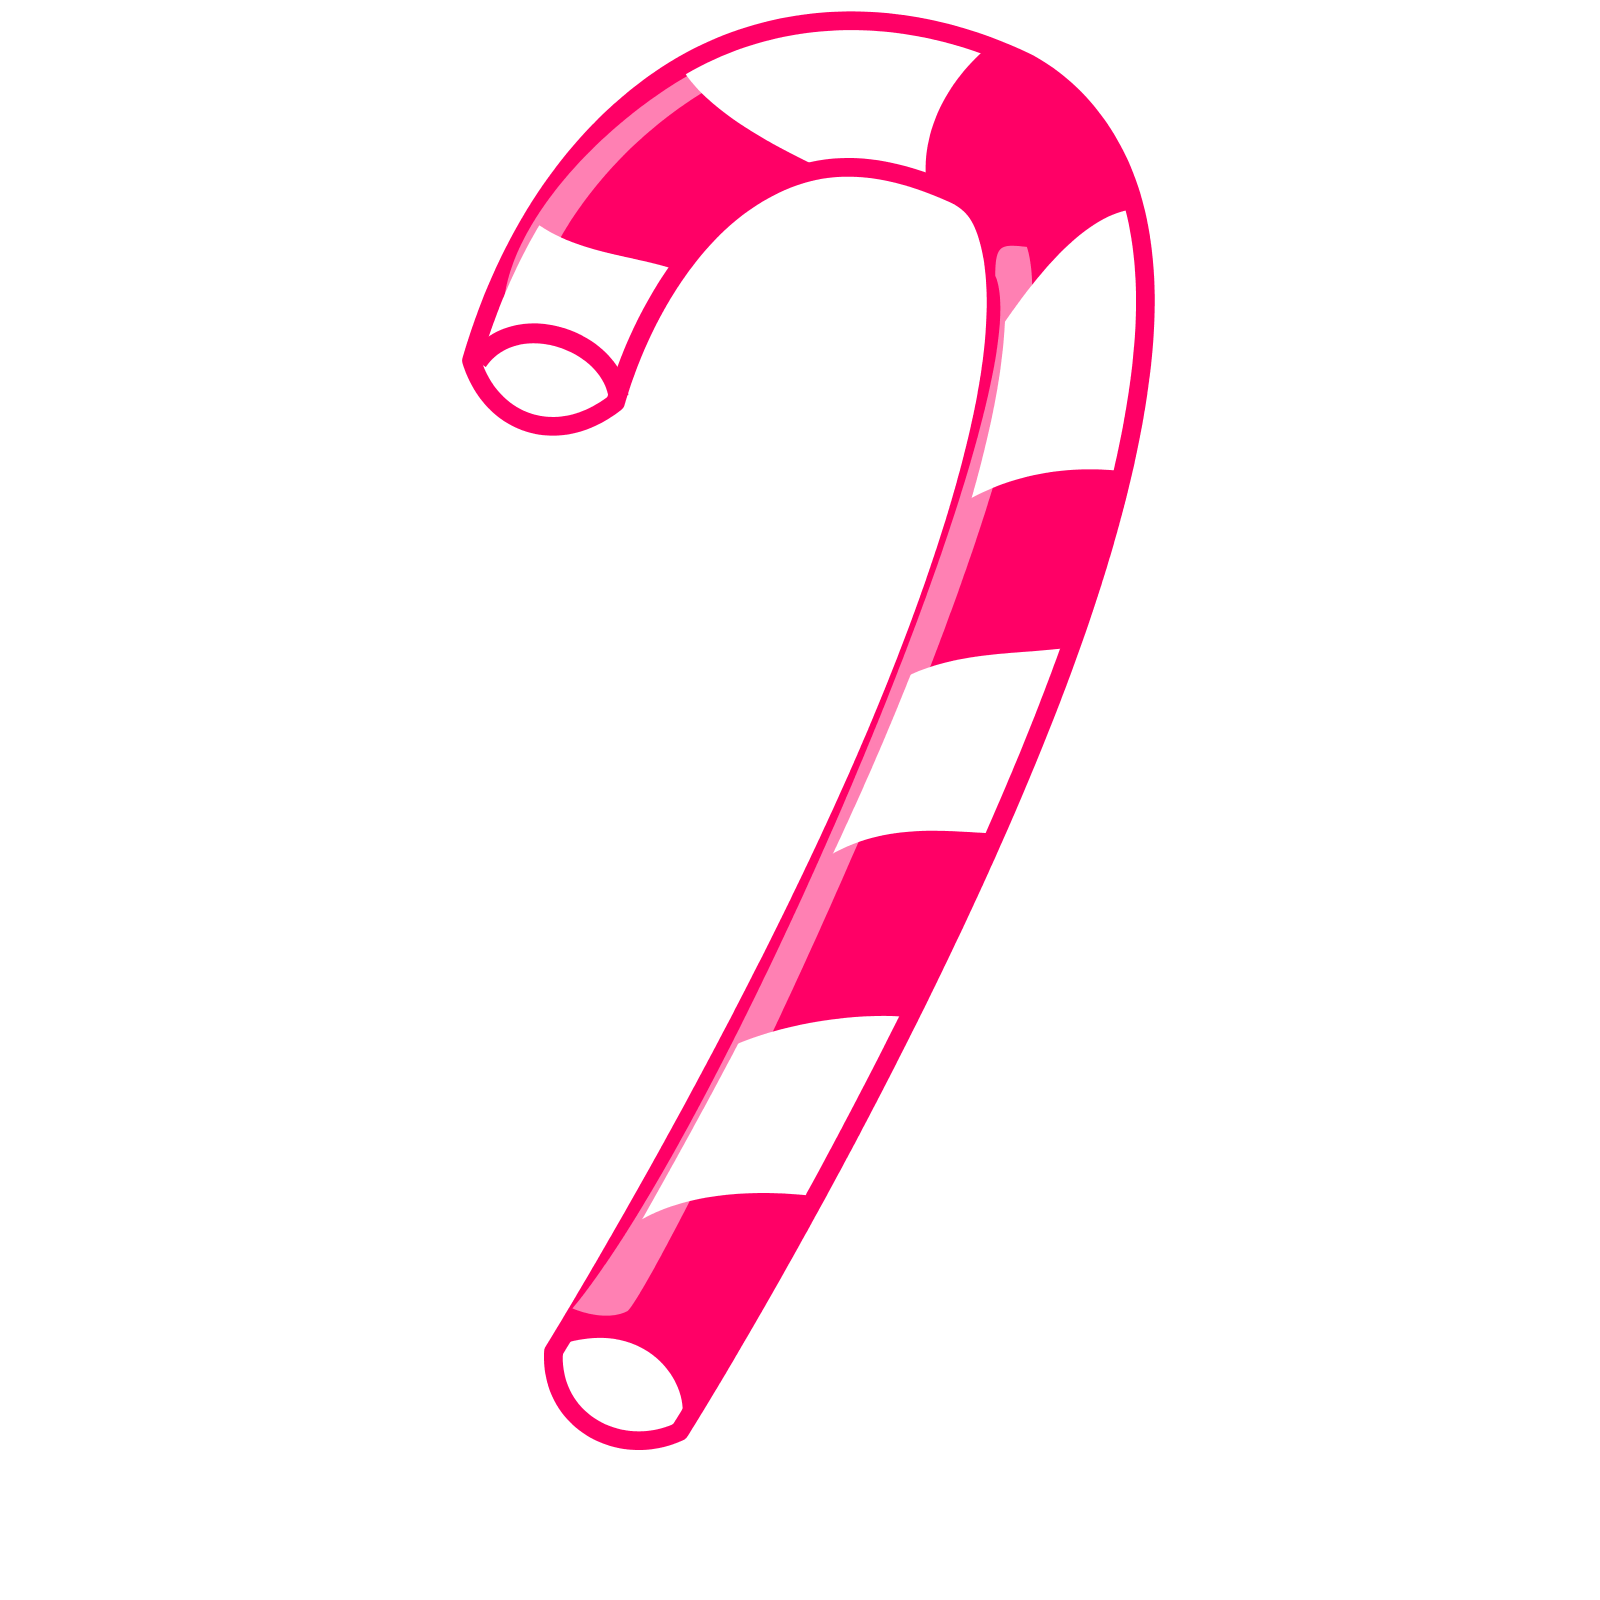 Xmas Stuff For > Christmas Candy Cane Clip Art